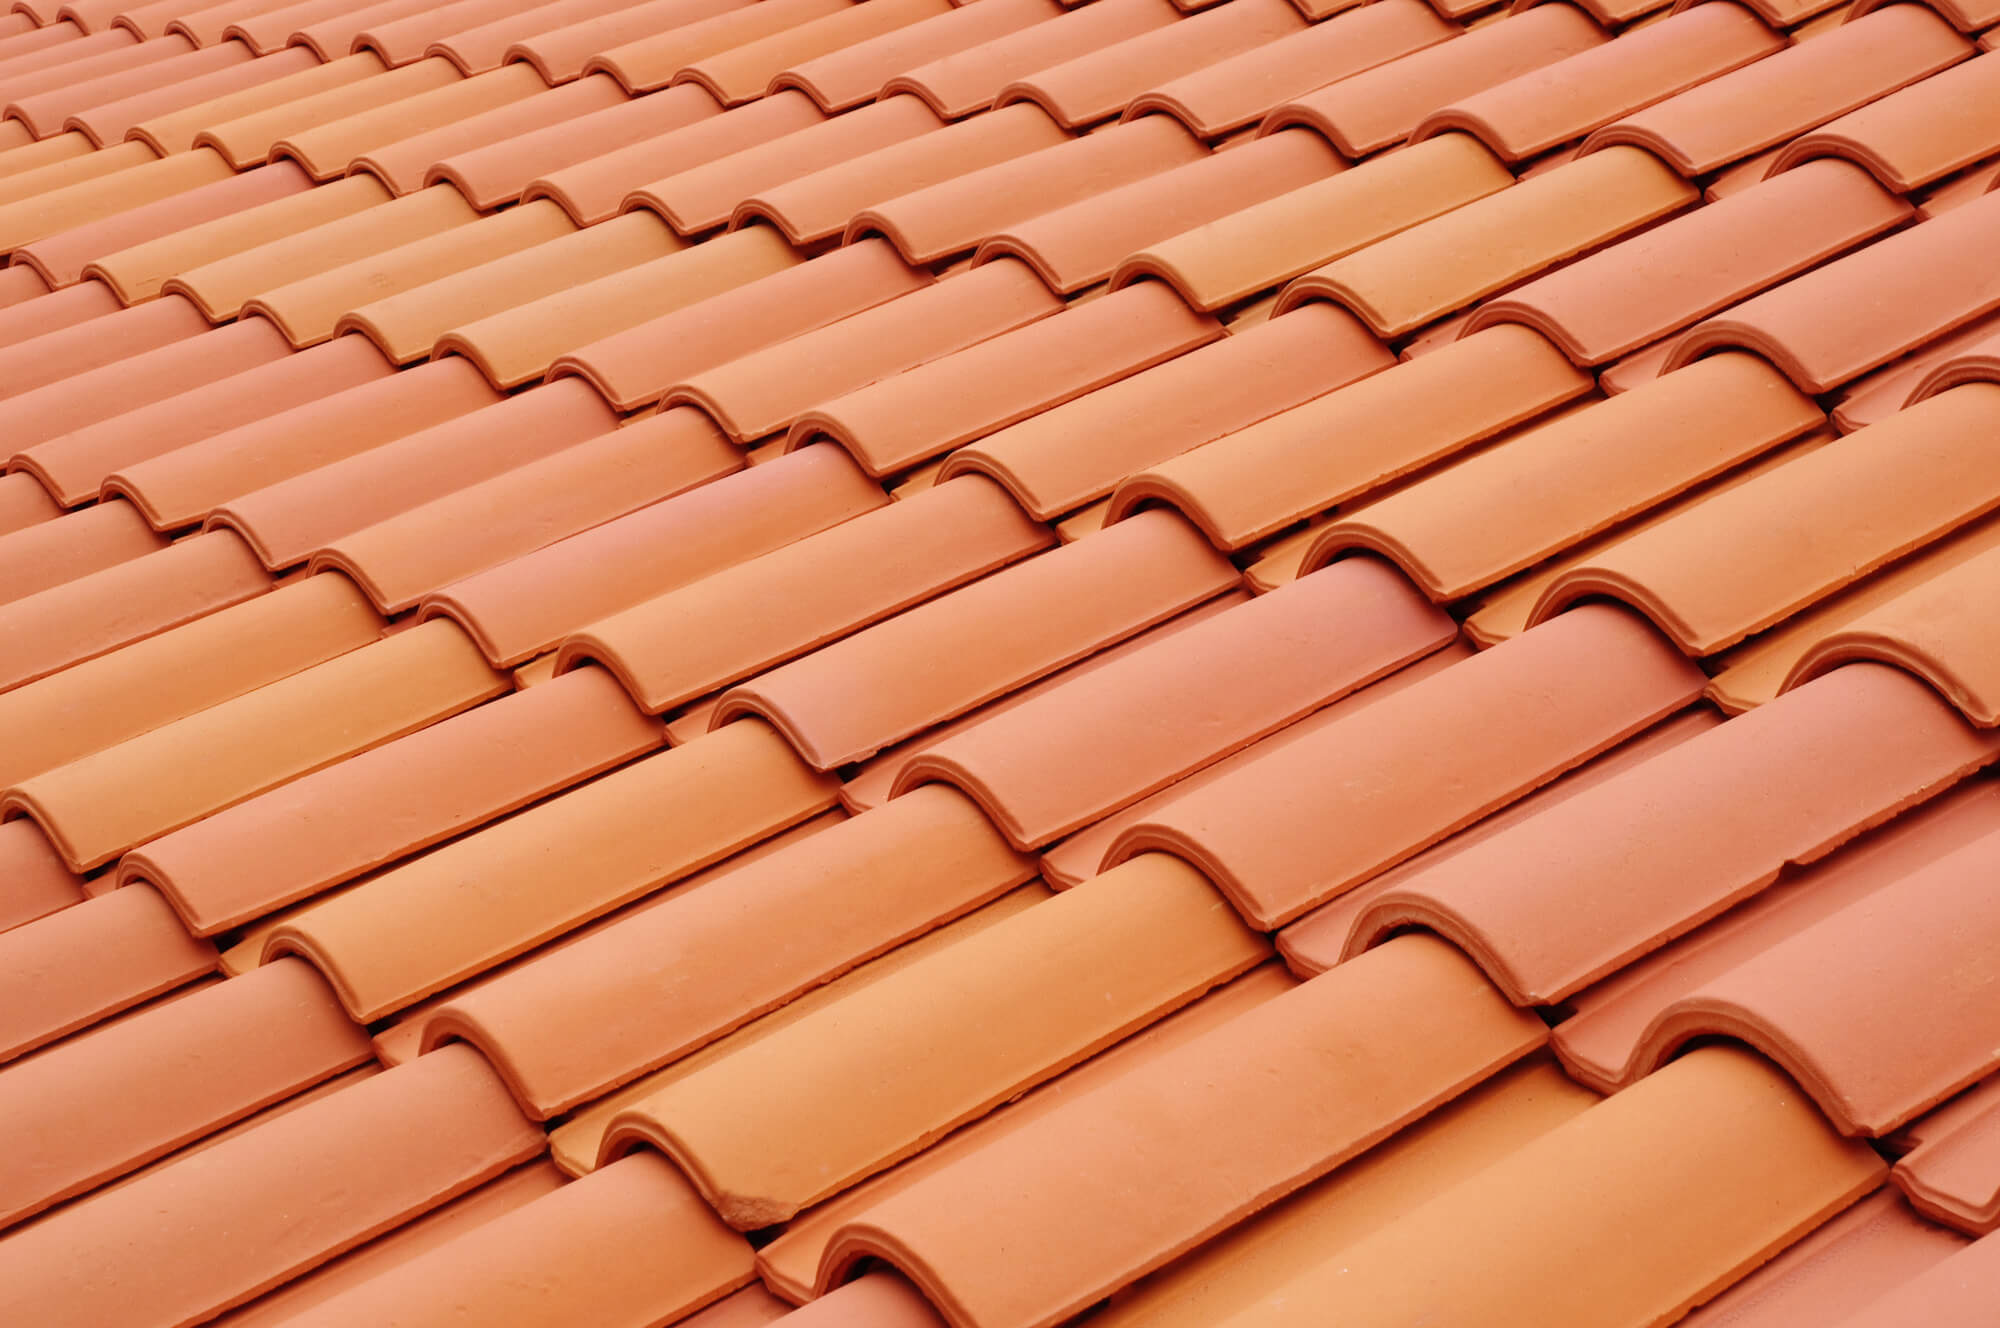 An Ultimate Guide To Tile Roofs